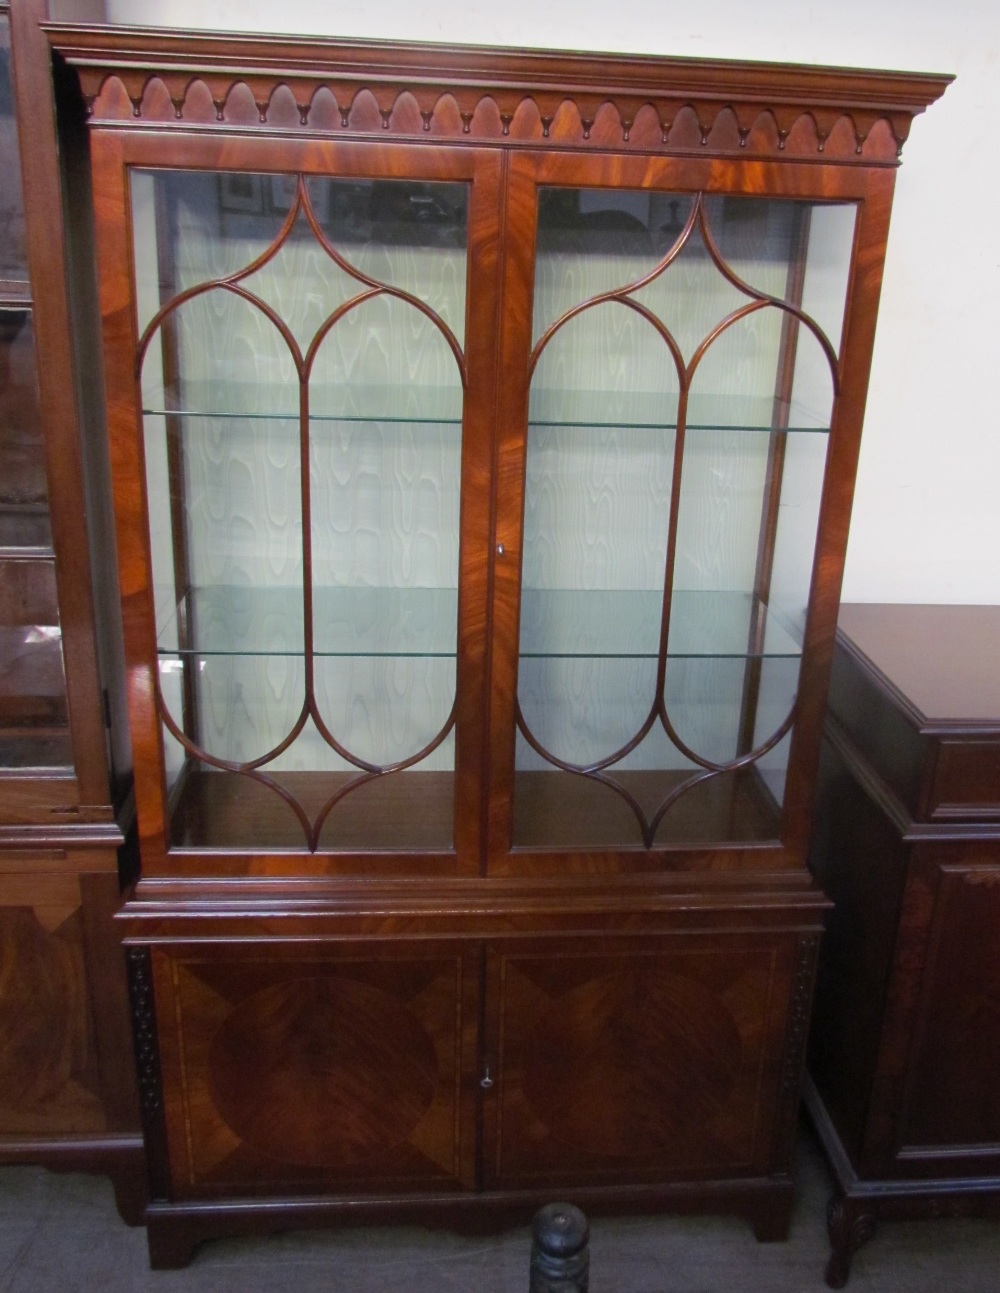 A 20th century mahogany bookcase with a moulded cornice above a pair of glazed doors, - Image 2 of 3